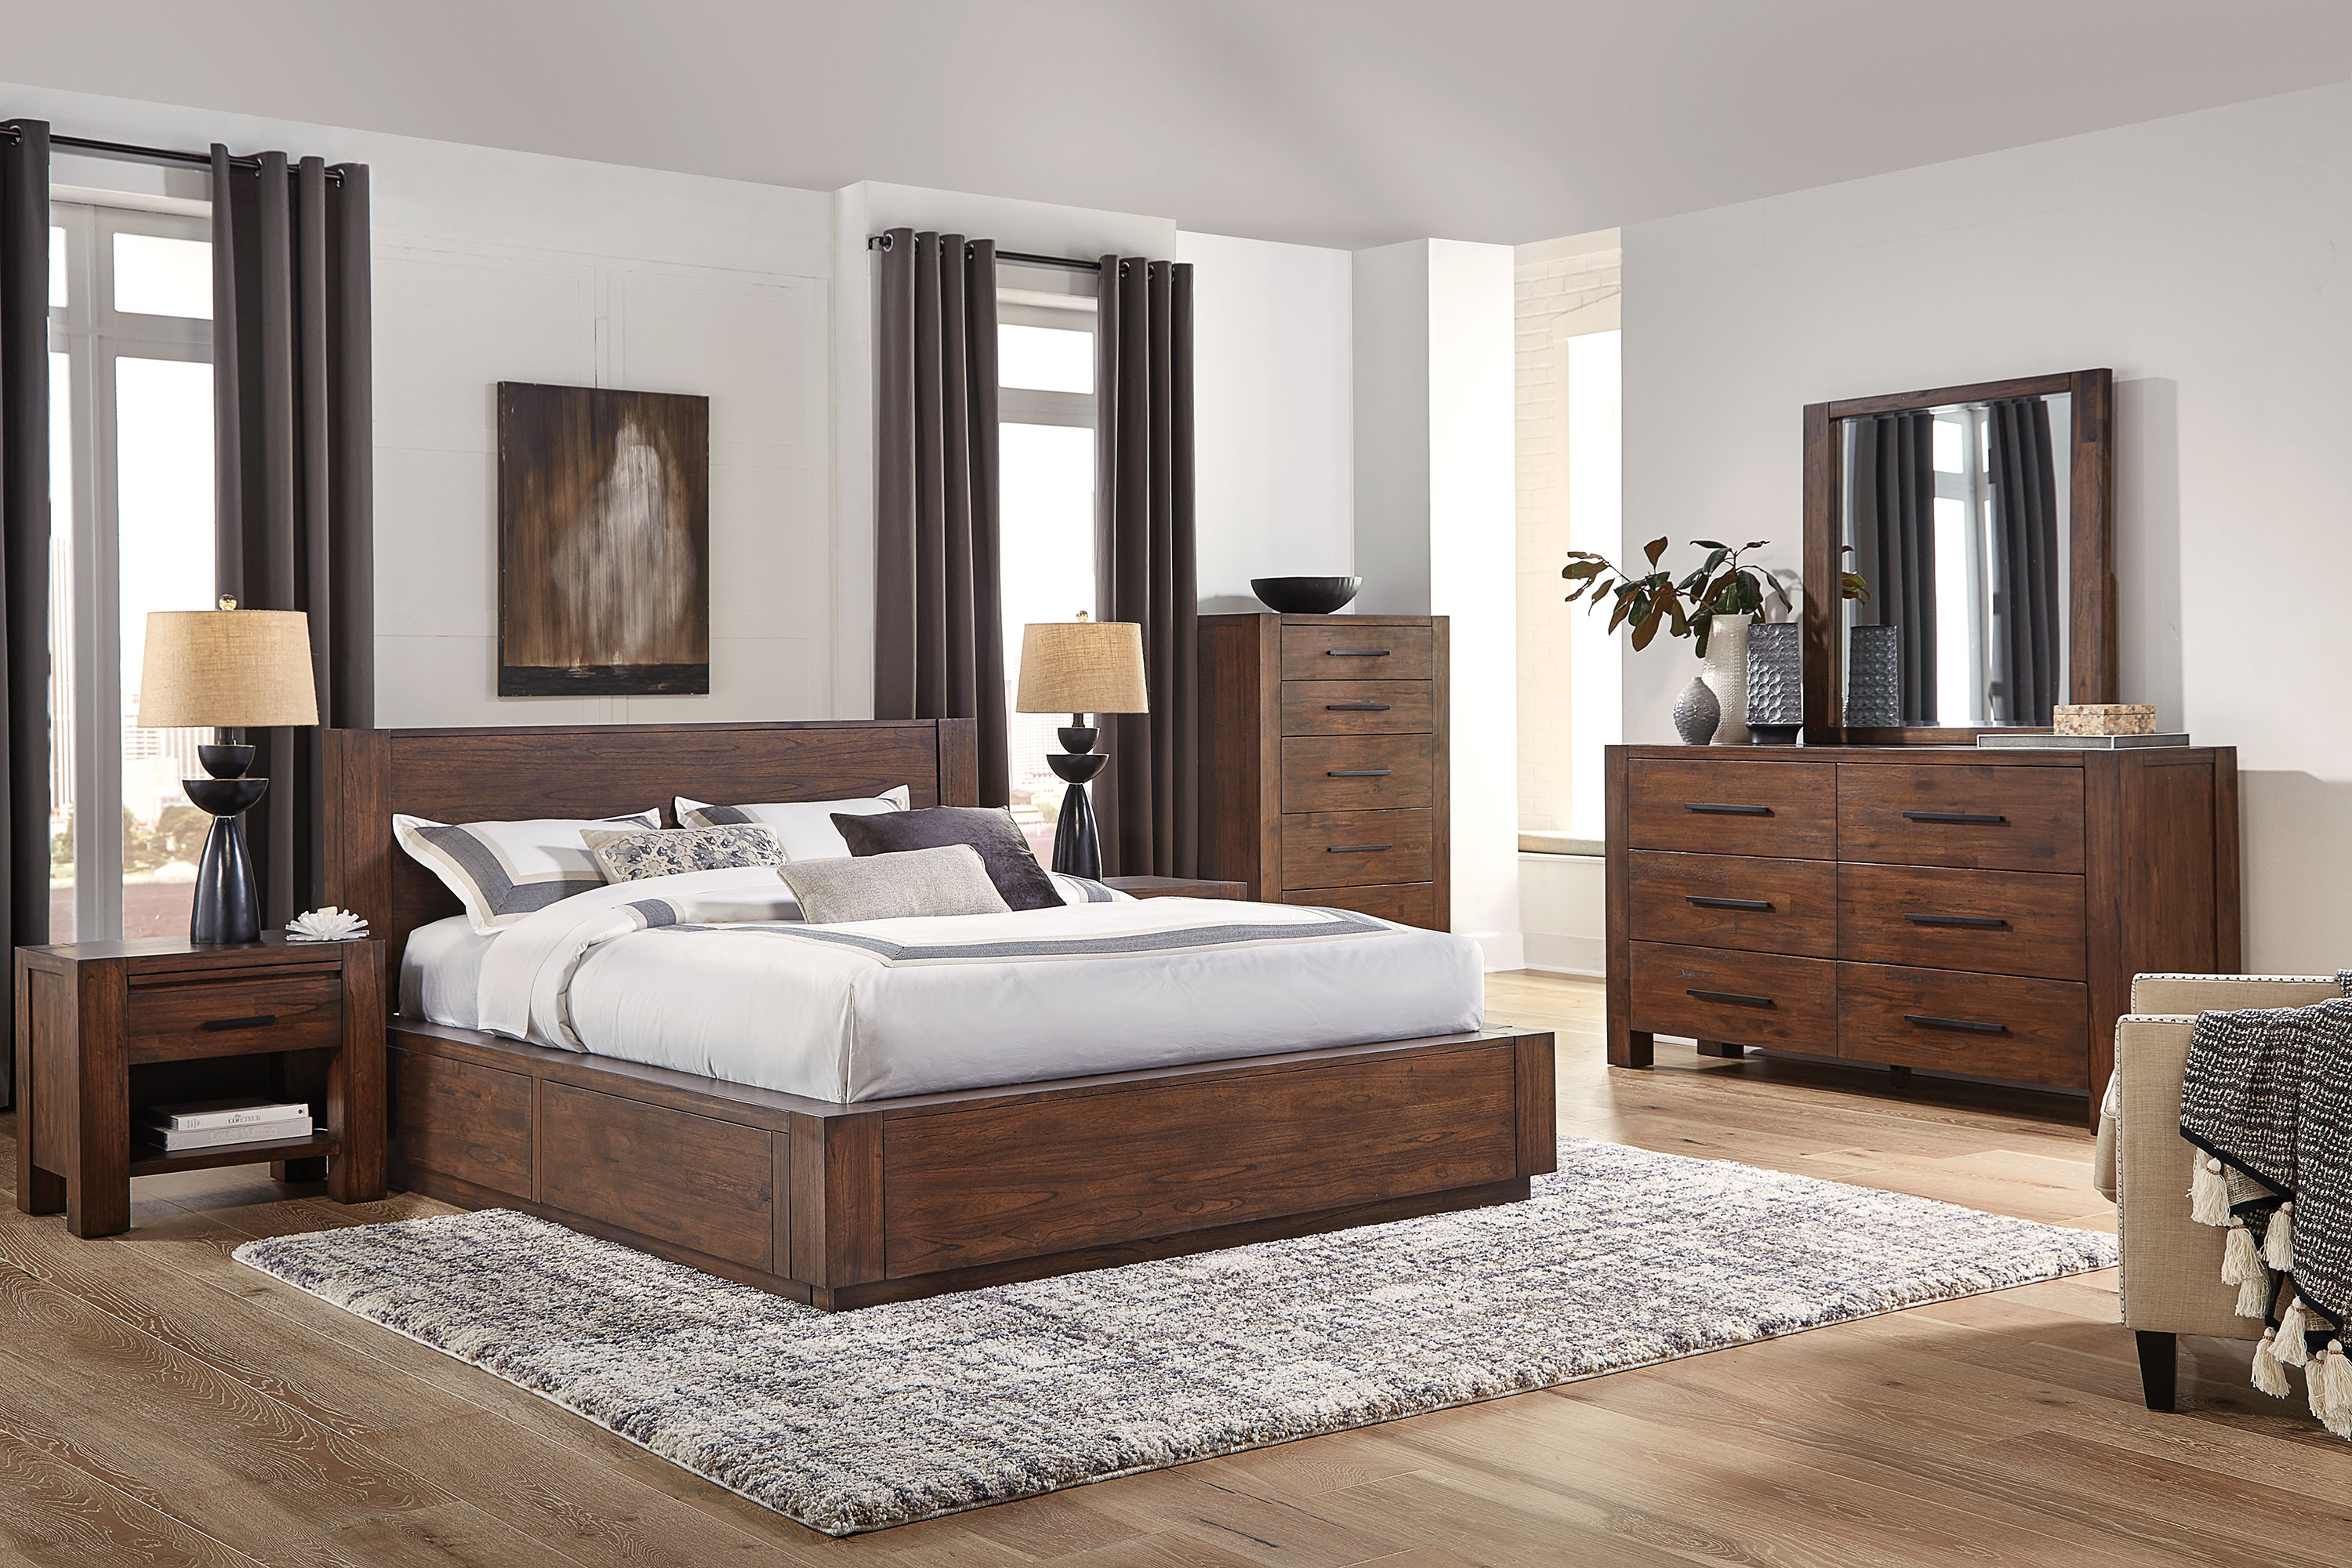 Cassia 4pc Queen Storage Bedroom Two, Two Sided Headboard